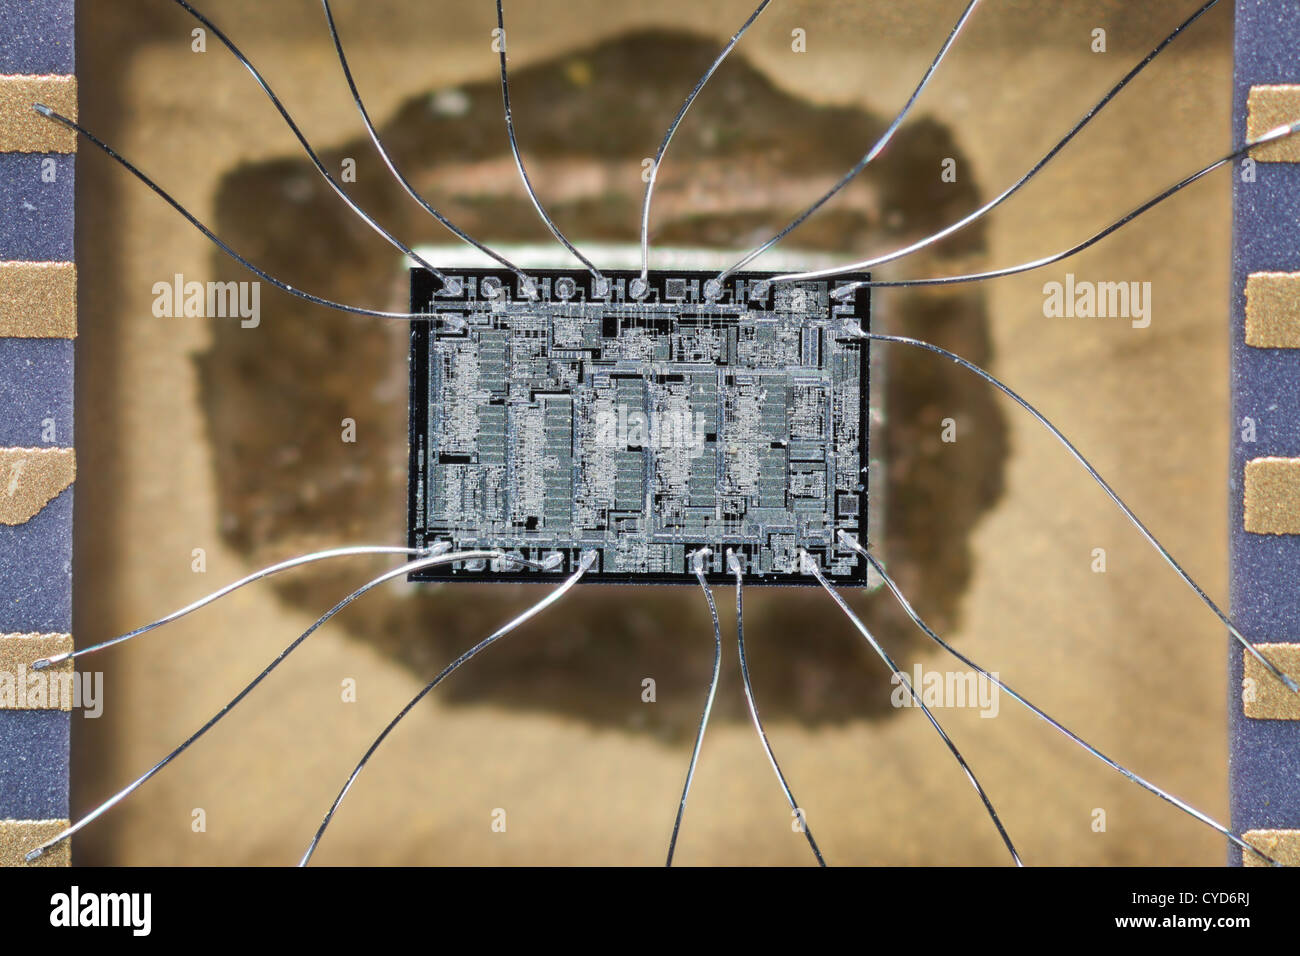 Hard disk drive silicon chip integrated circuits, chip with connecting silver wires Stock Photo